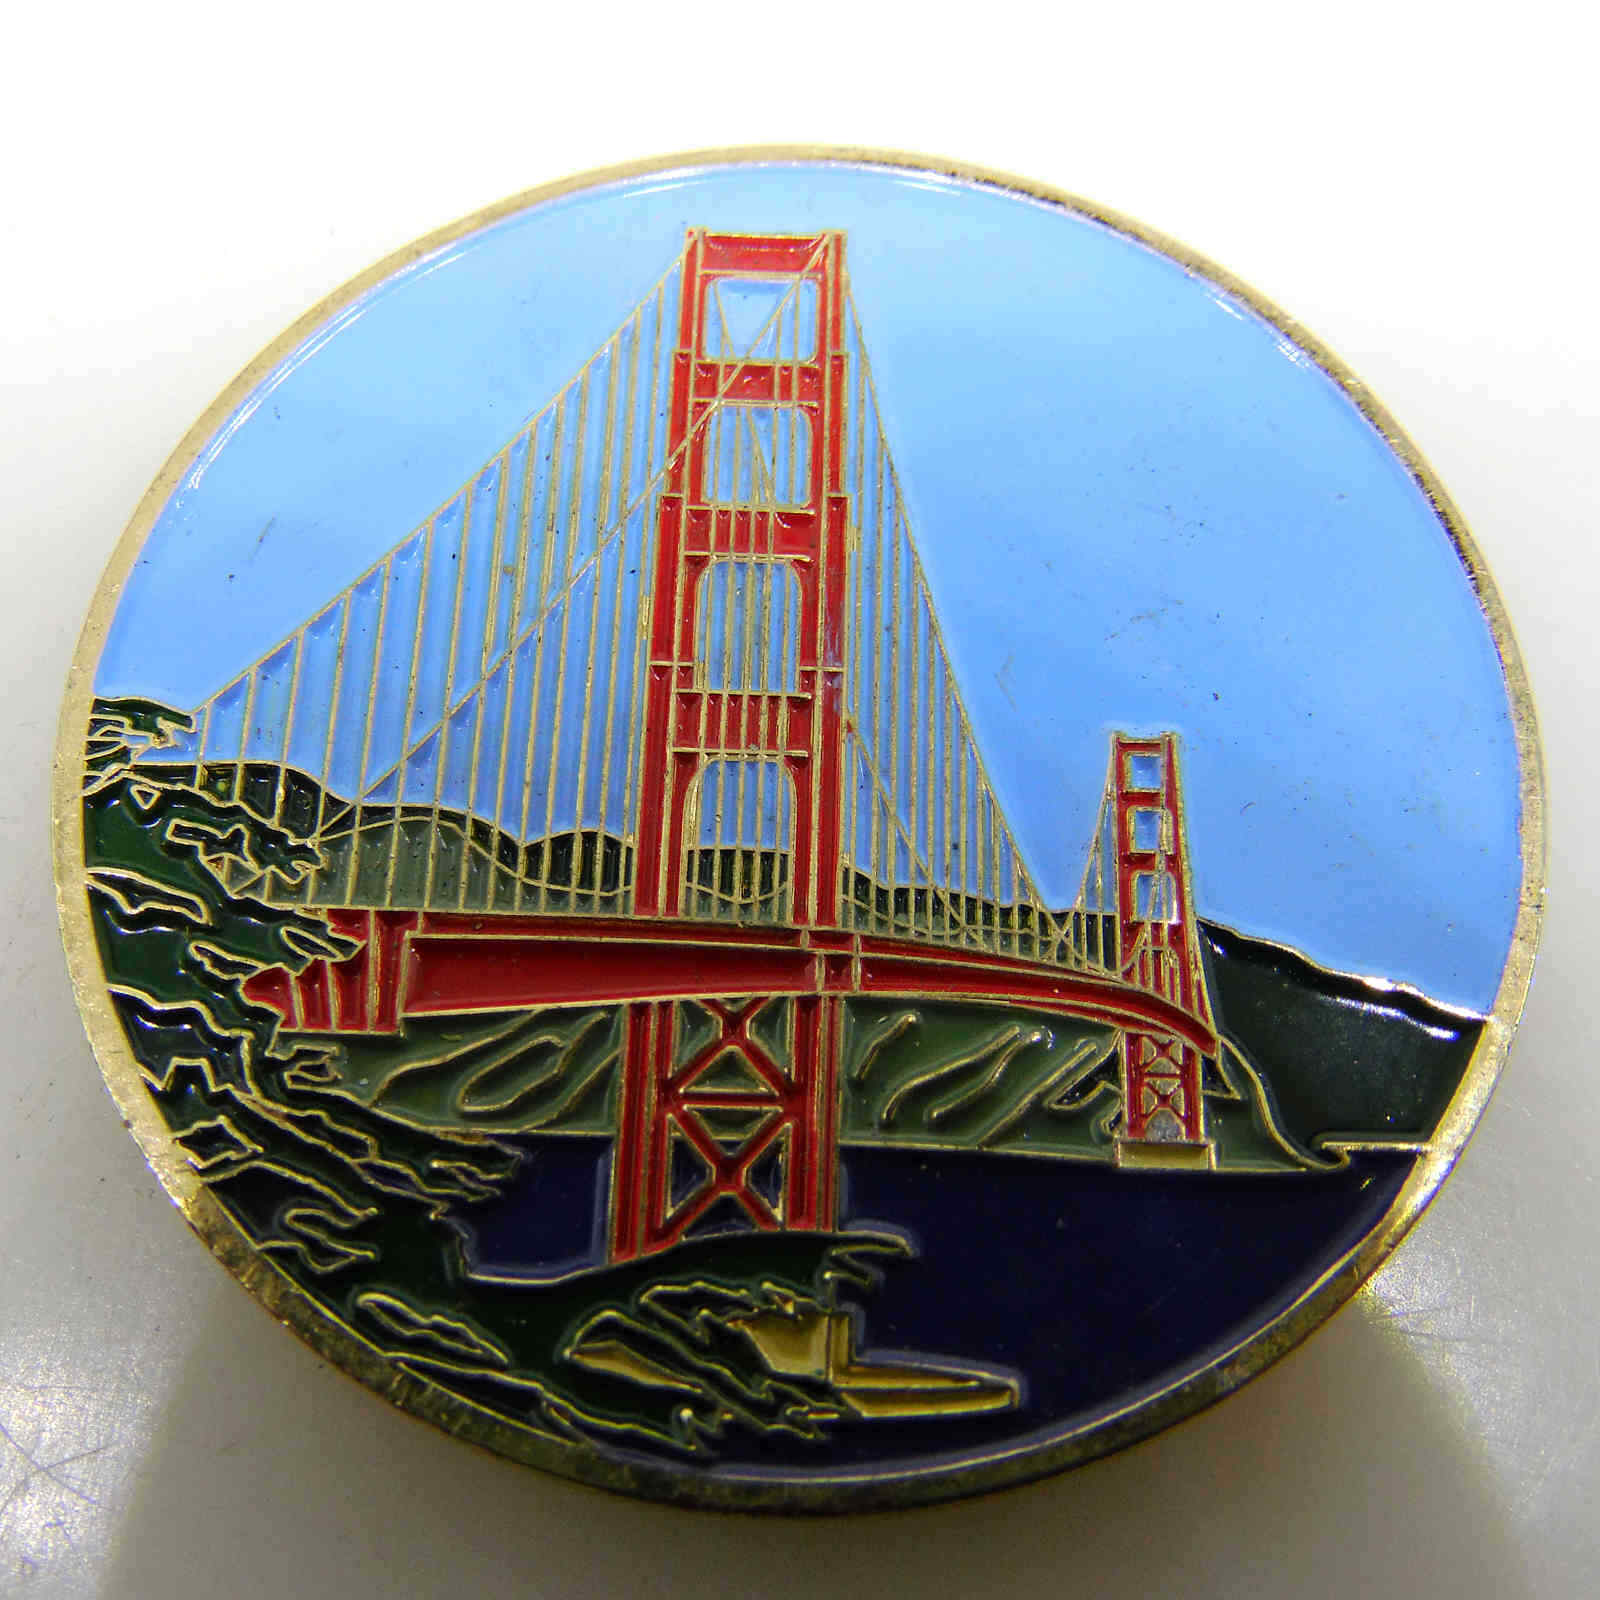 U.S. PRETRIAL SERVICES AGENCY NORTHERN DISTRICT OF CALIFORNIA CHALLENGE COIN